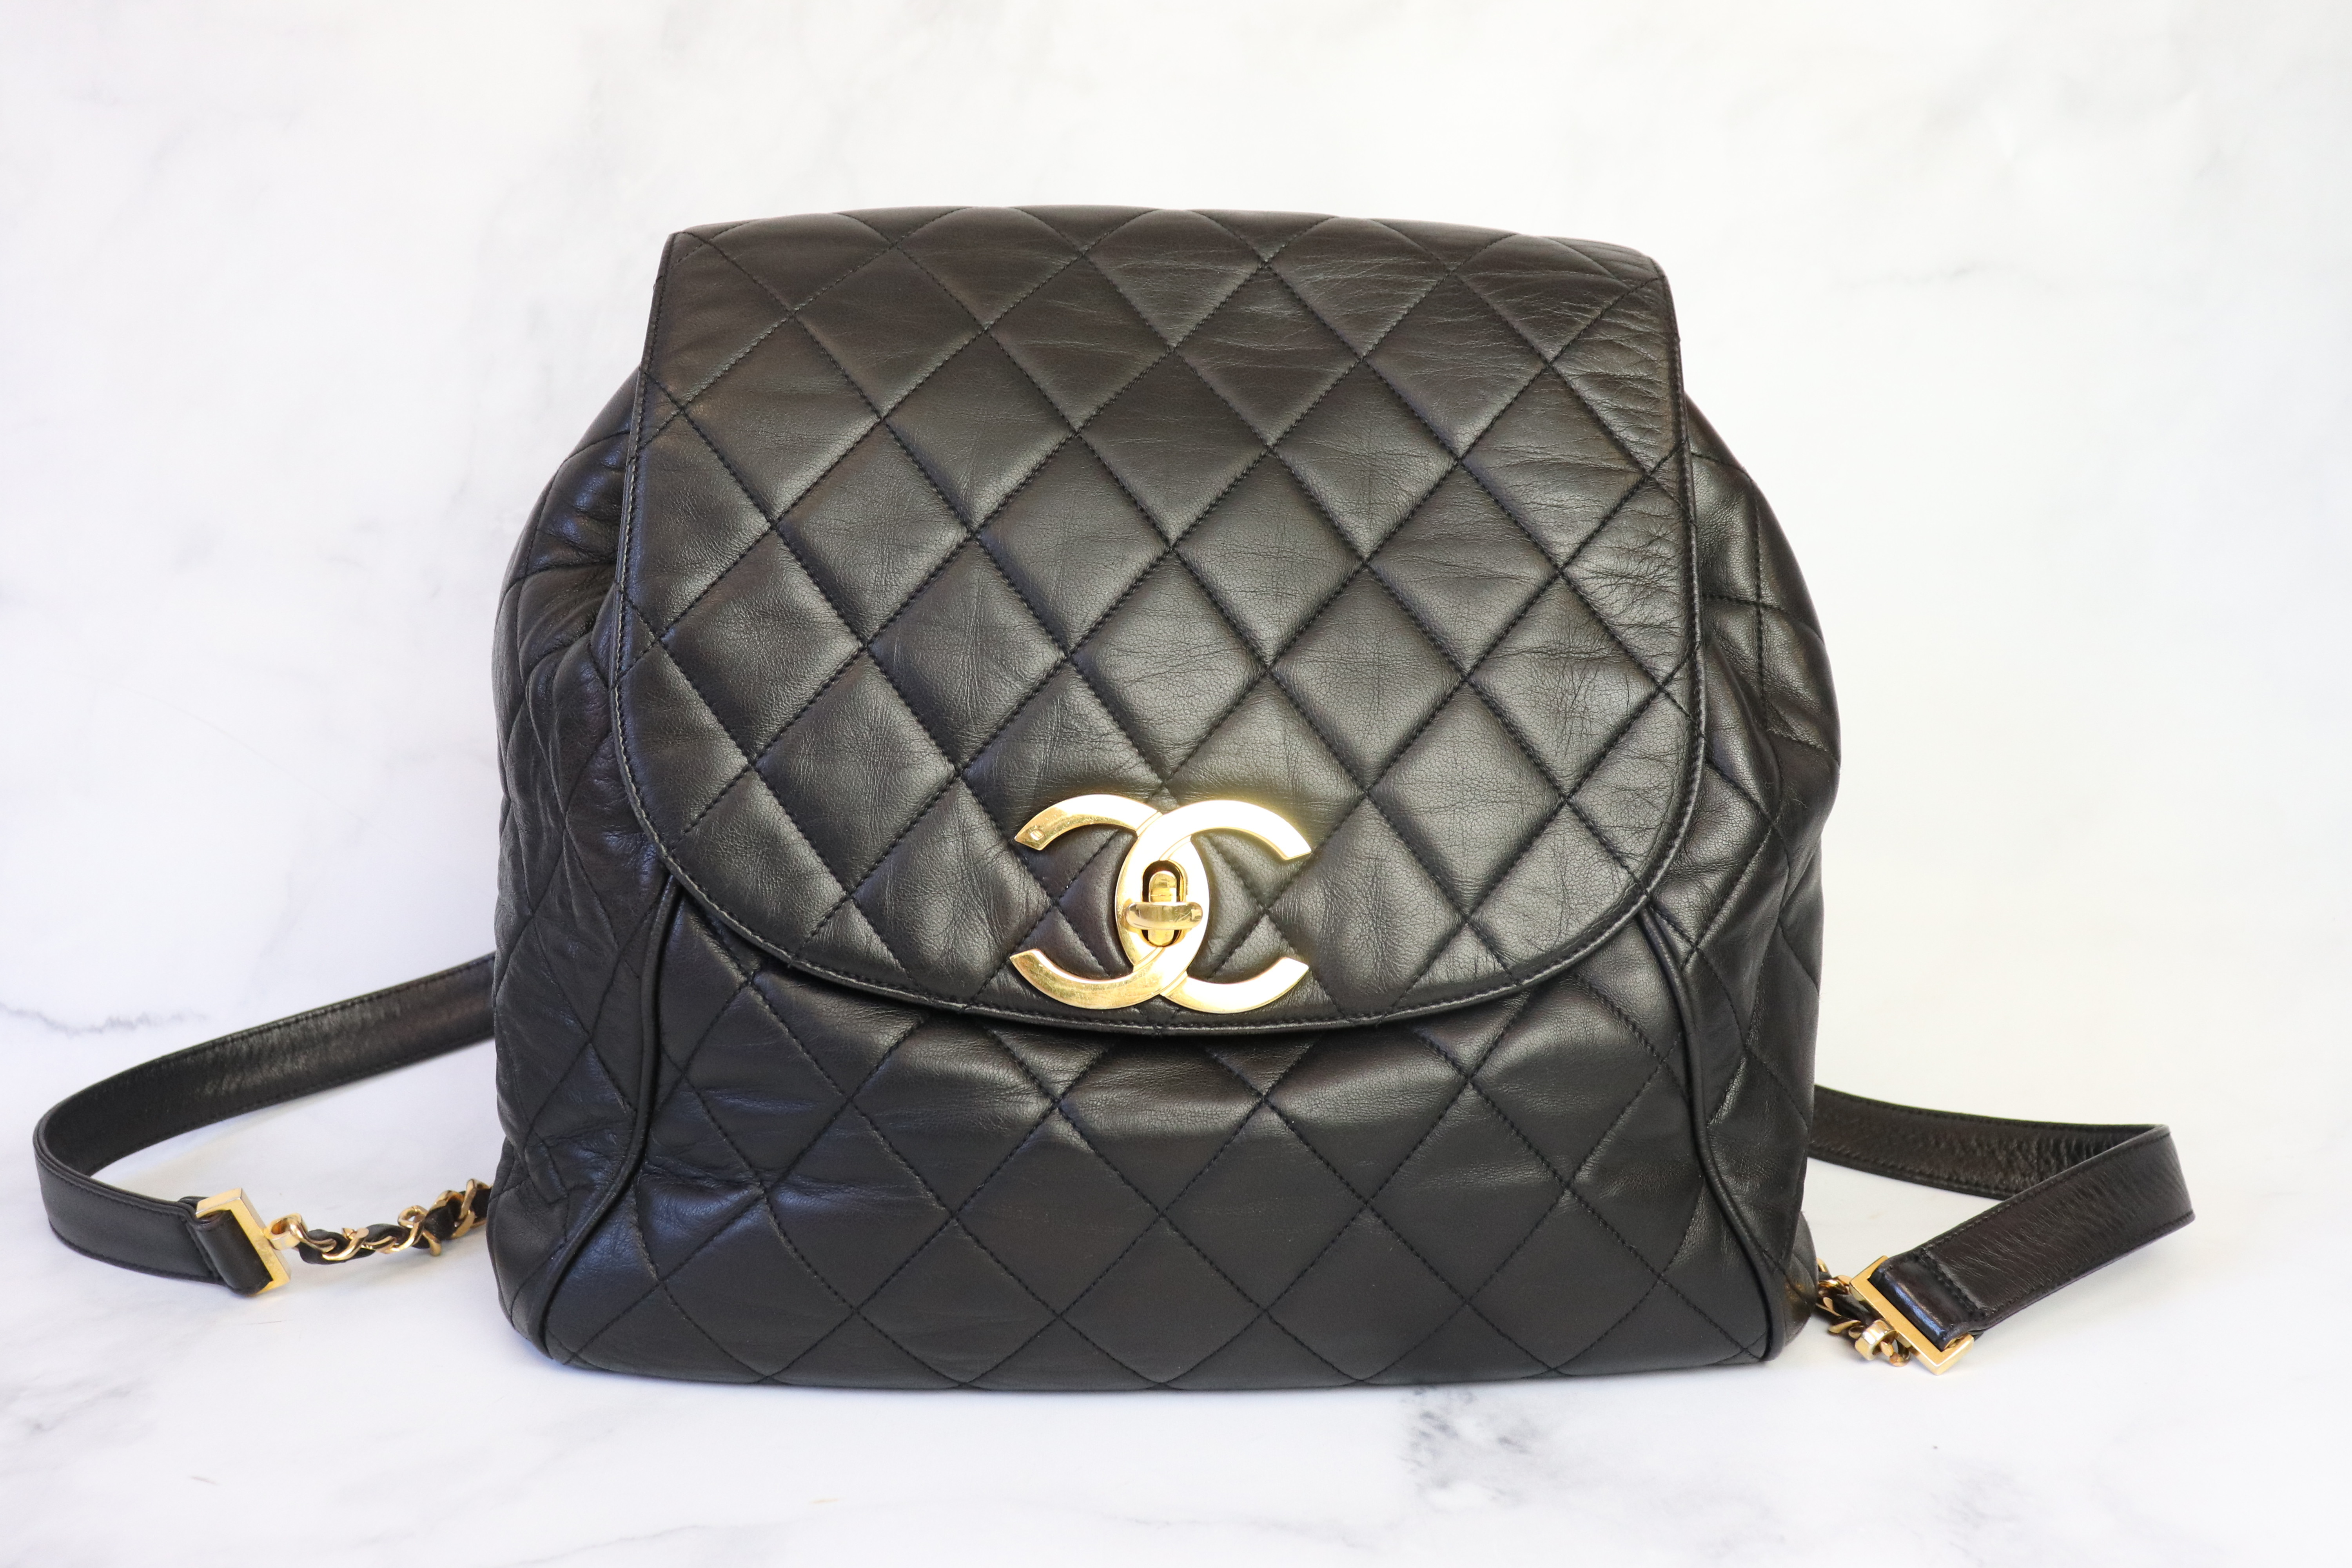 Chanel Filigree Backpack Medium, Beige and Black Caviar with Gold Hardware,  Preowned No Dustbag WA001 - Julia Rose Boston